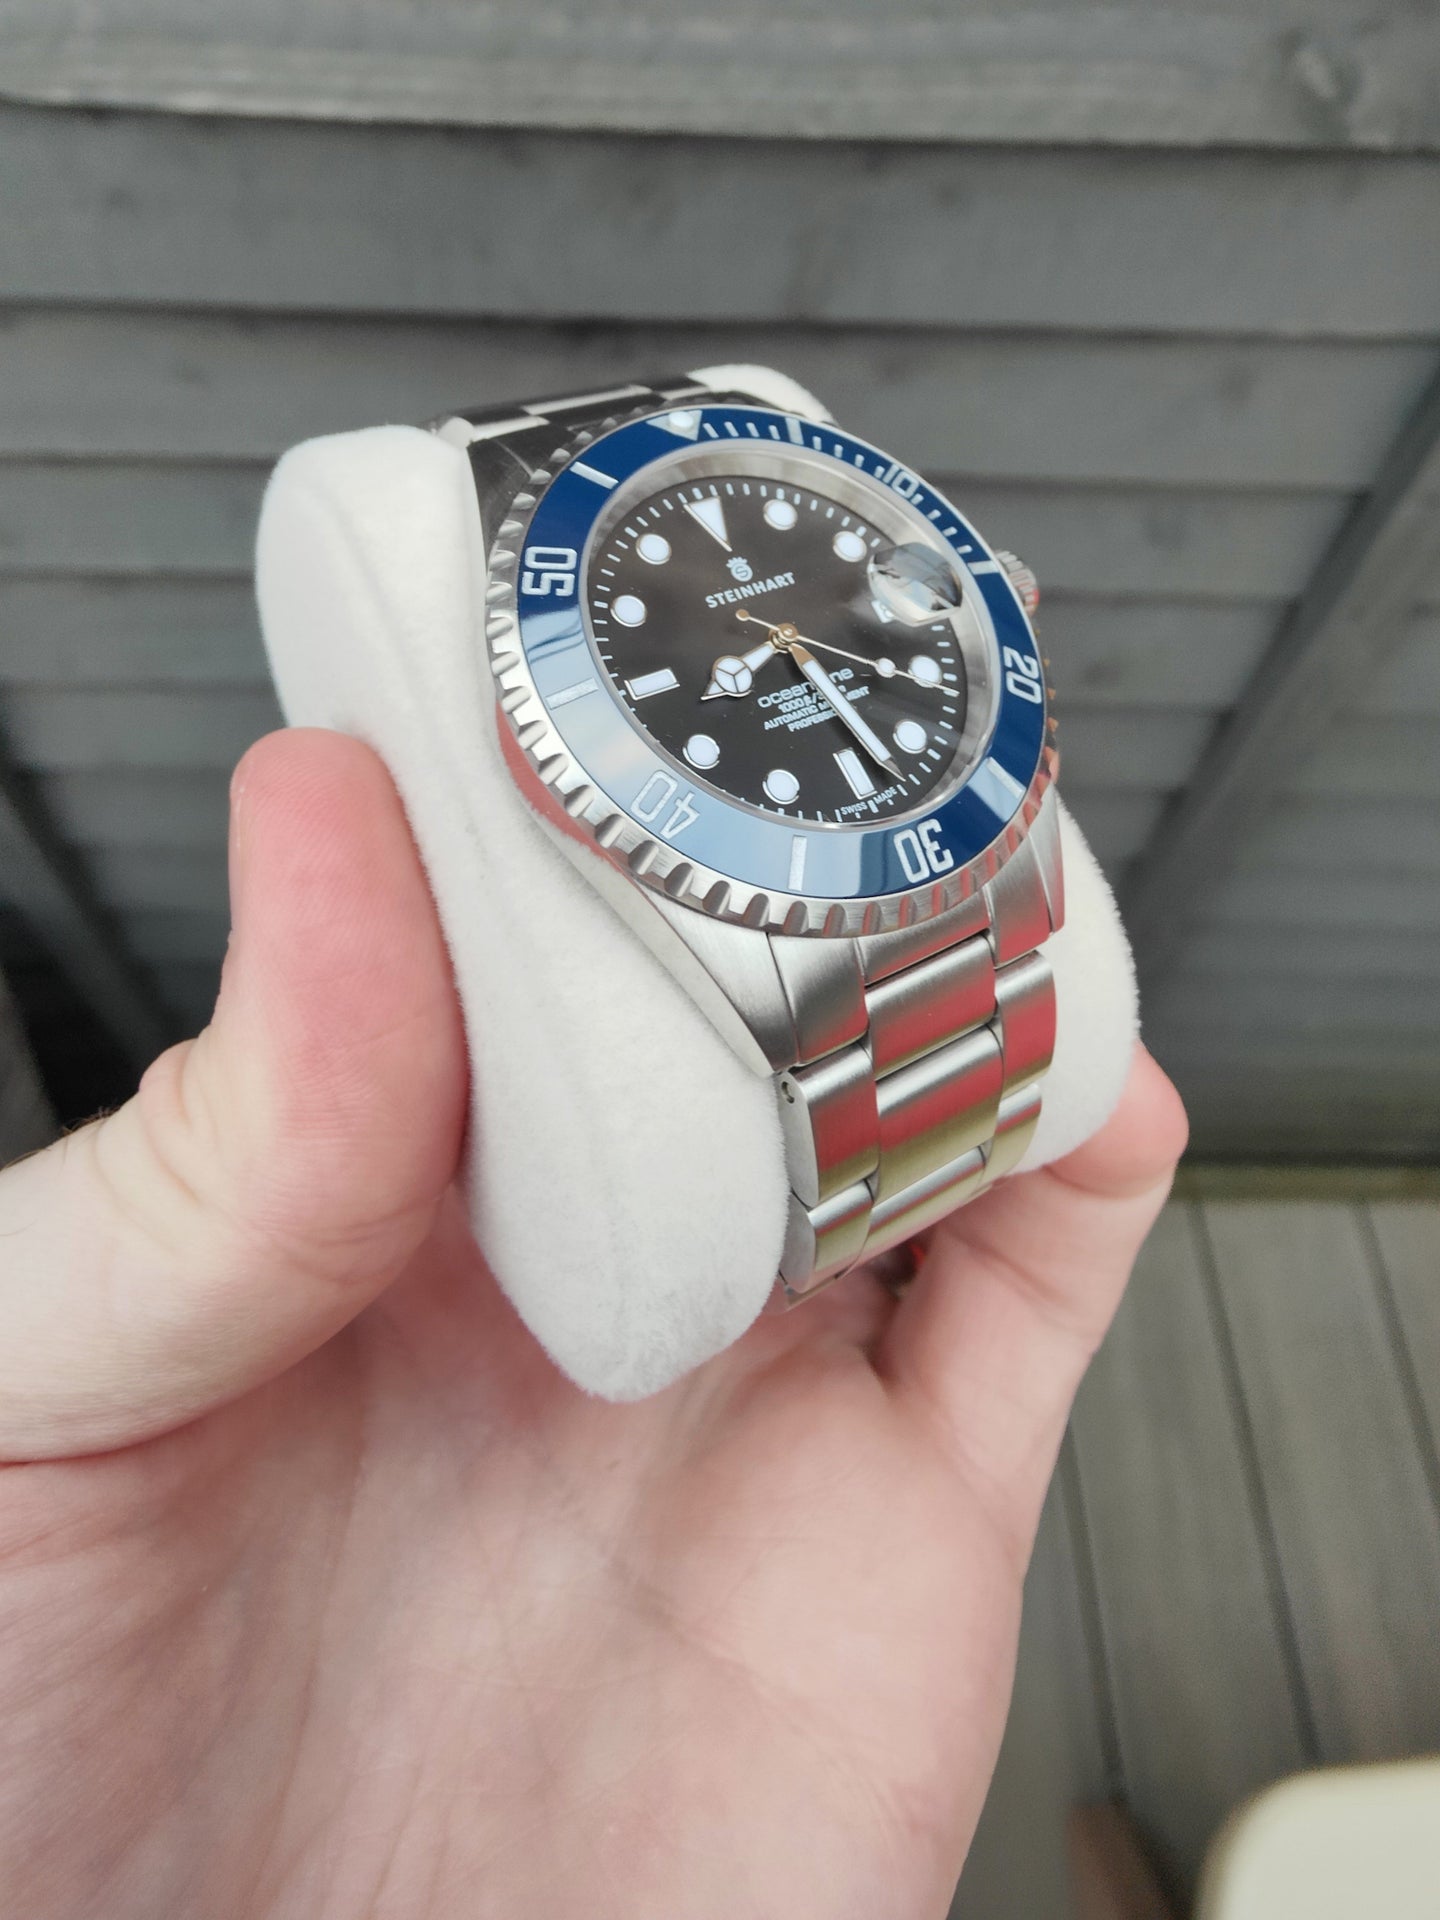 FS: Steinhart Ocean 1 42mm. Modded with Rolex style crystal and